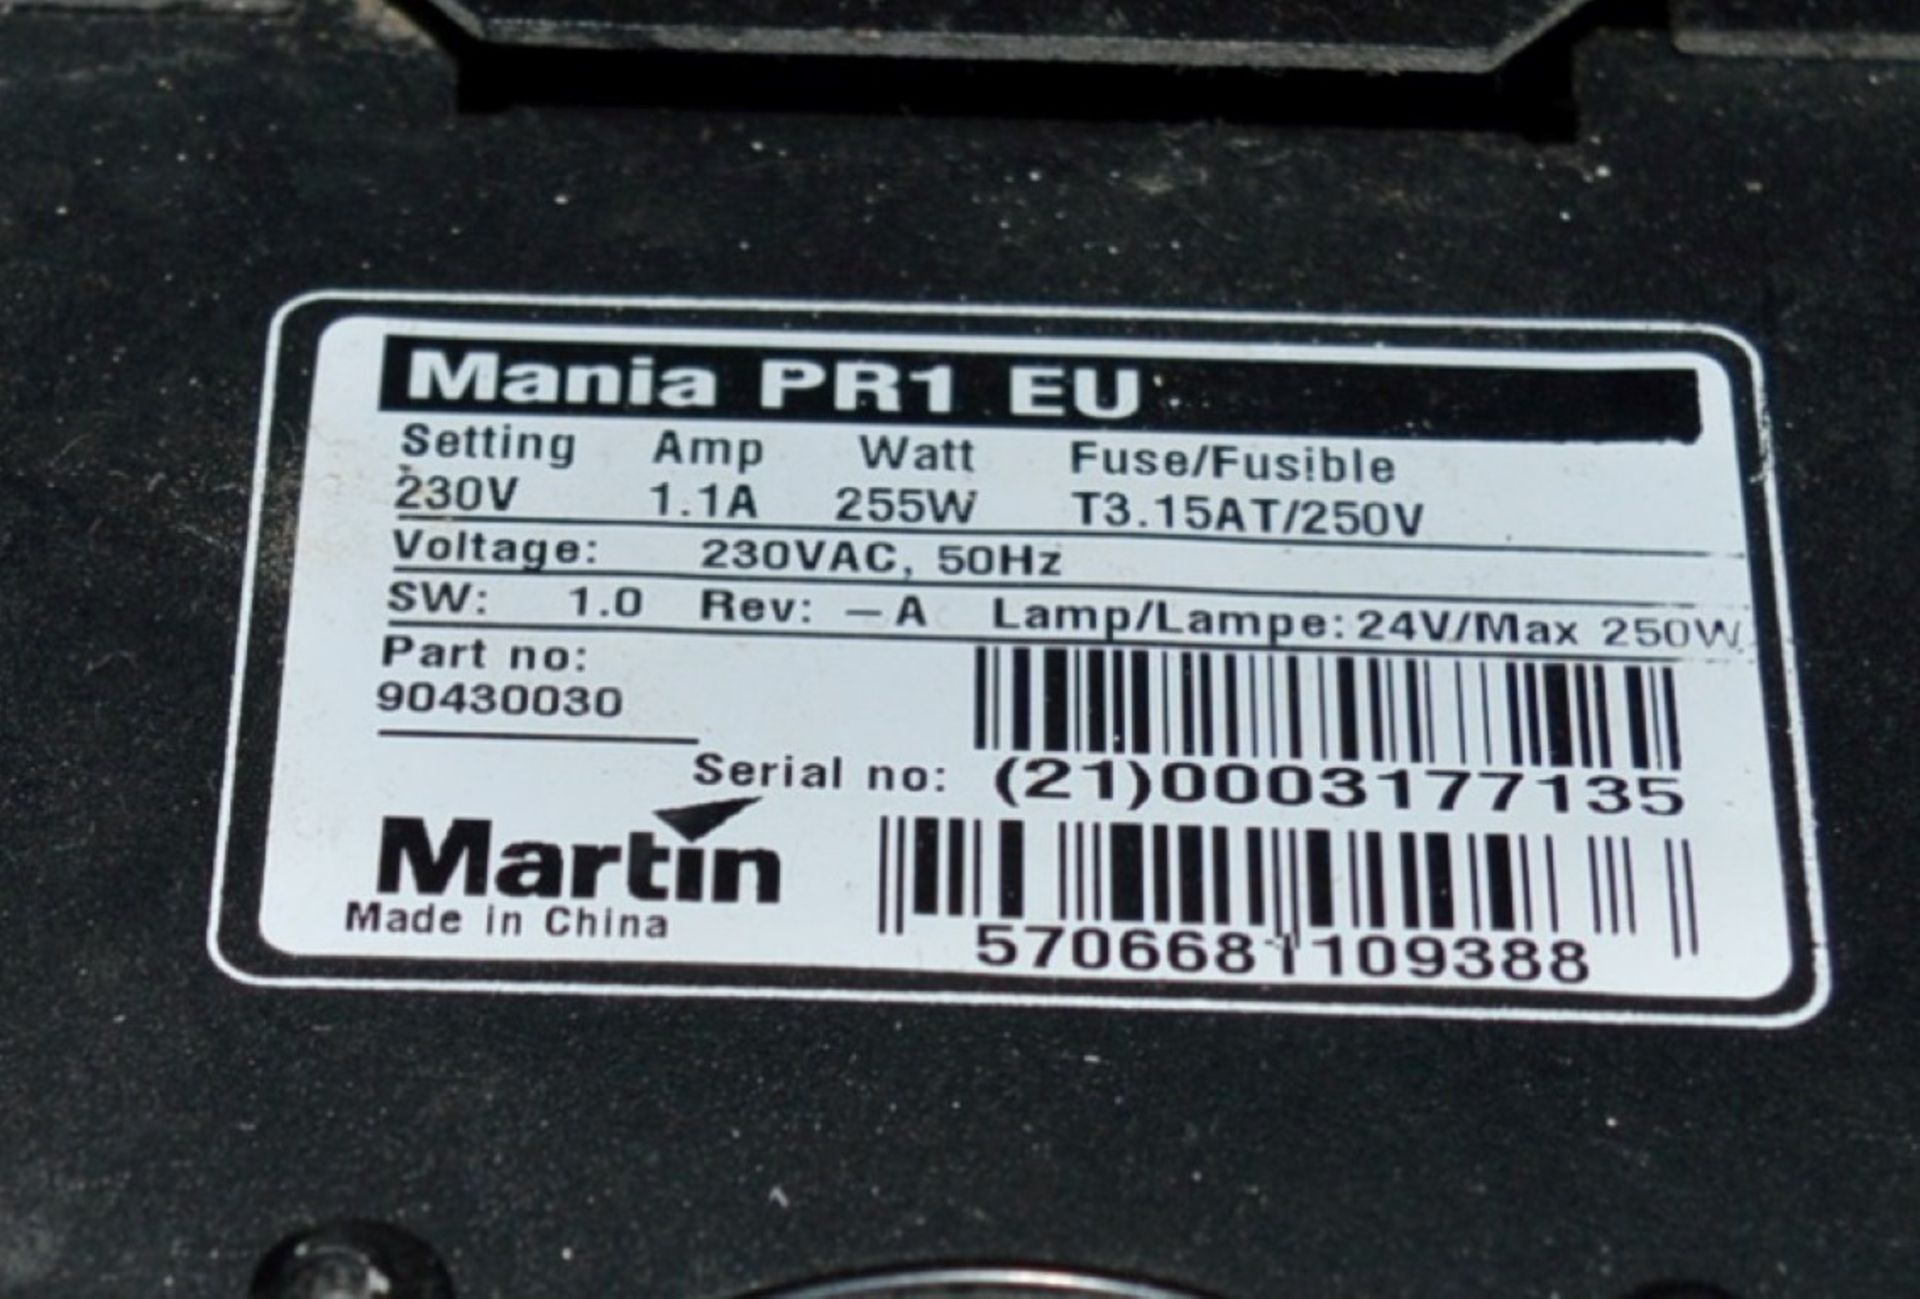 2 x Martin Mania PR1 Rotating Gobo Projector Night Club Stage Lighting Units - Untested - CL090 - - Image 3 of 4